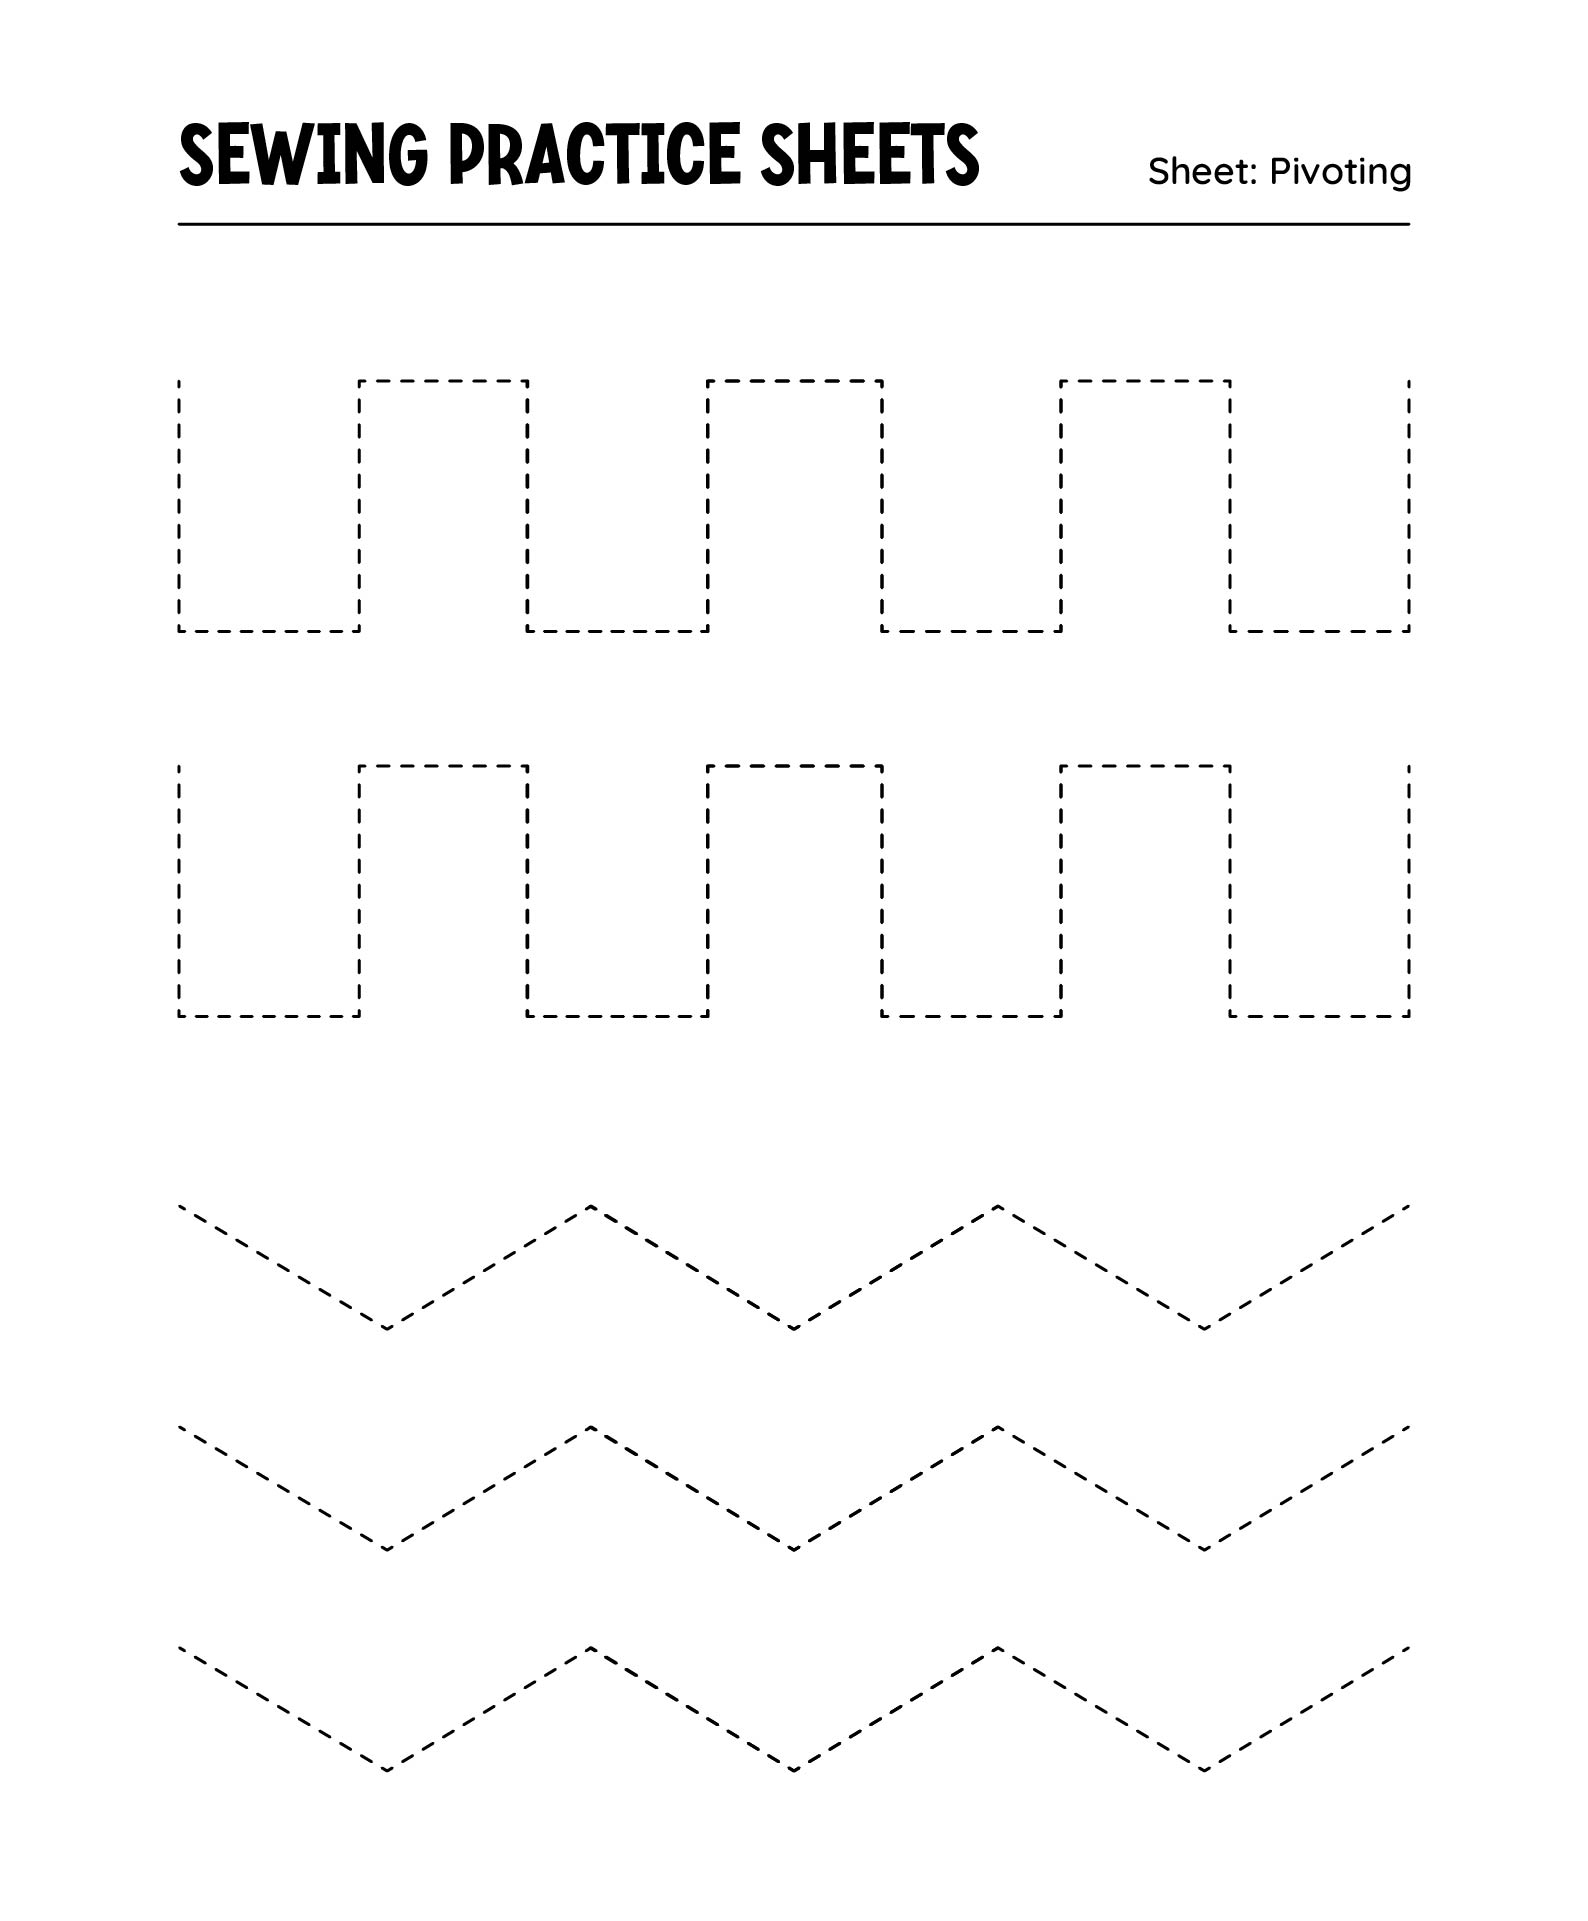 Machine Sewing Practice Sheets